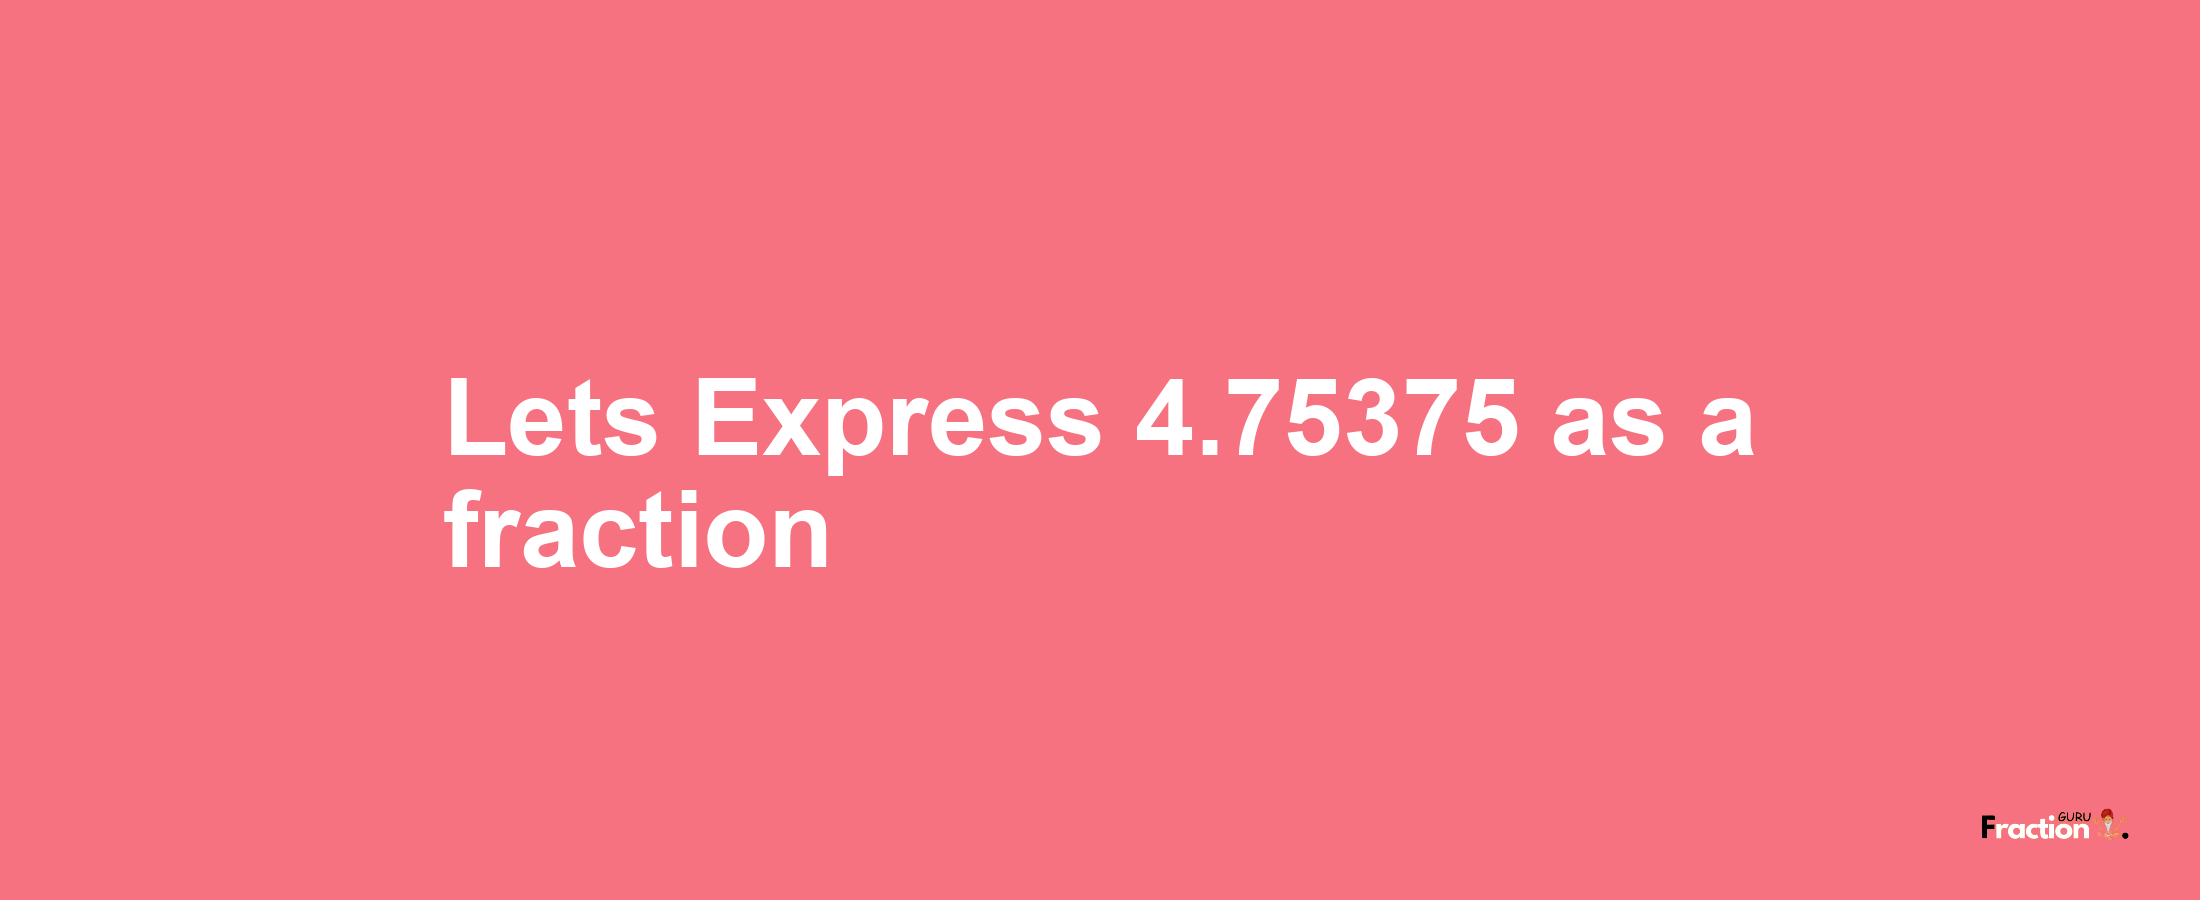 Lets Express 4.75375 as afraction